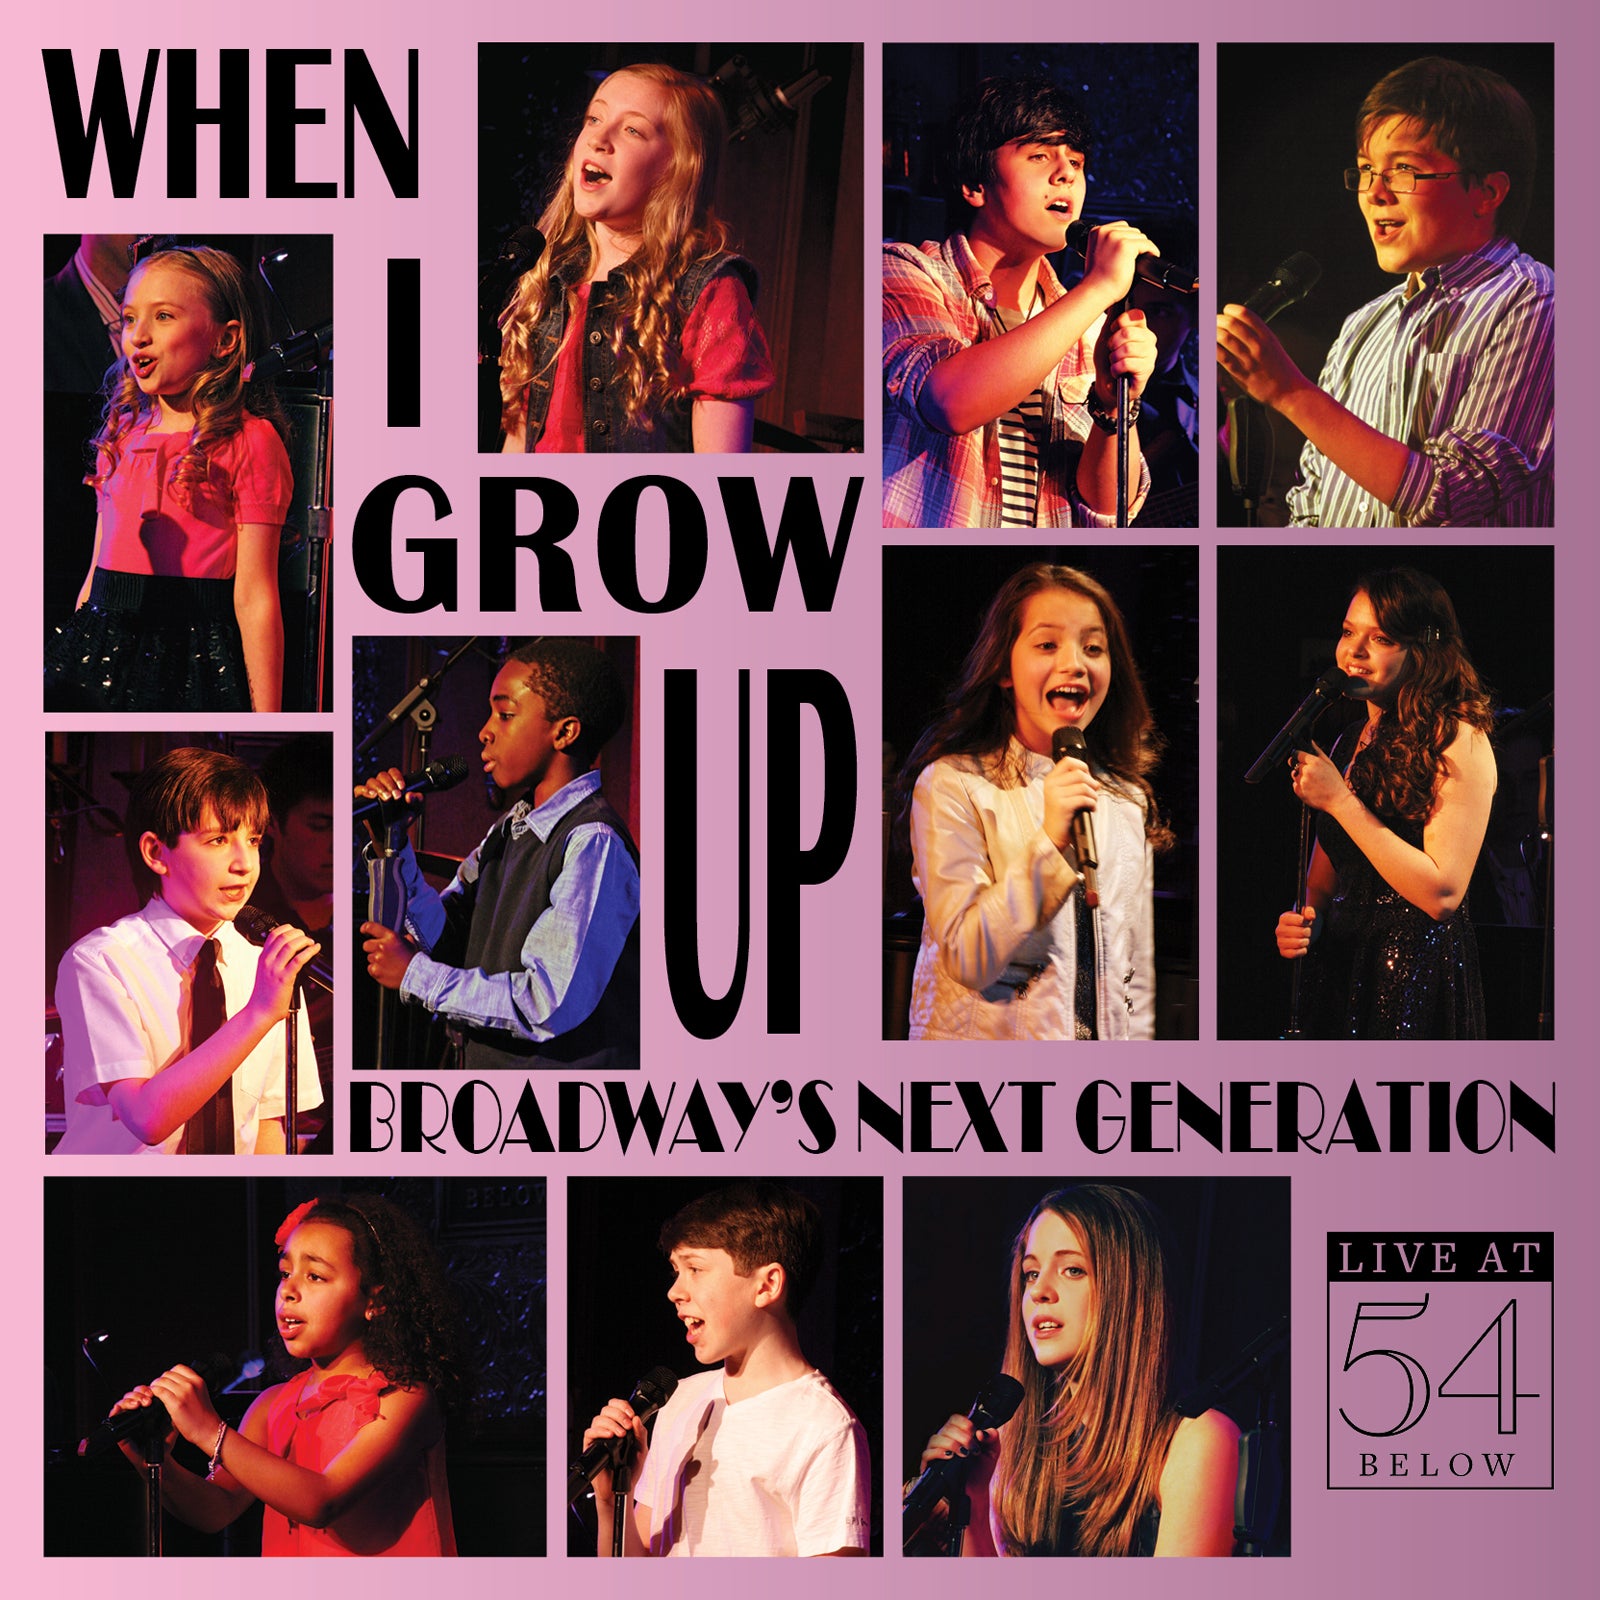 When I Grow Up: Broadway's Next Generation (Live at 54 Below) [CD]